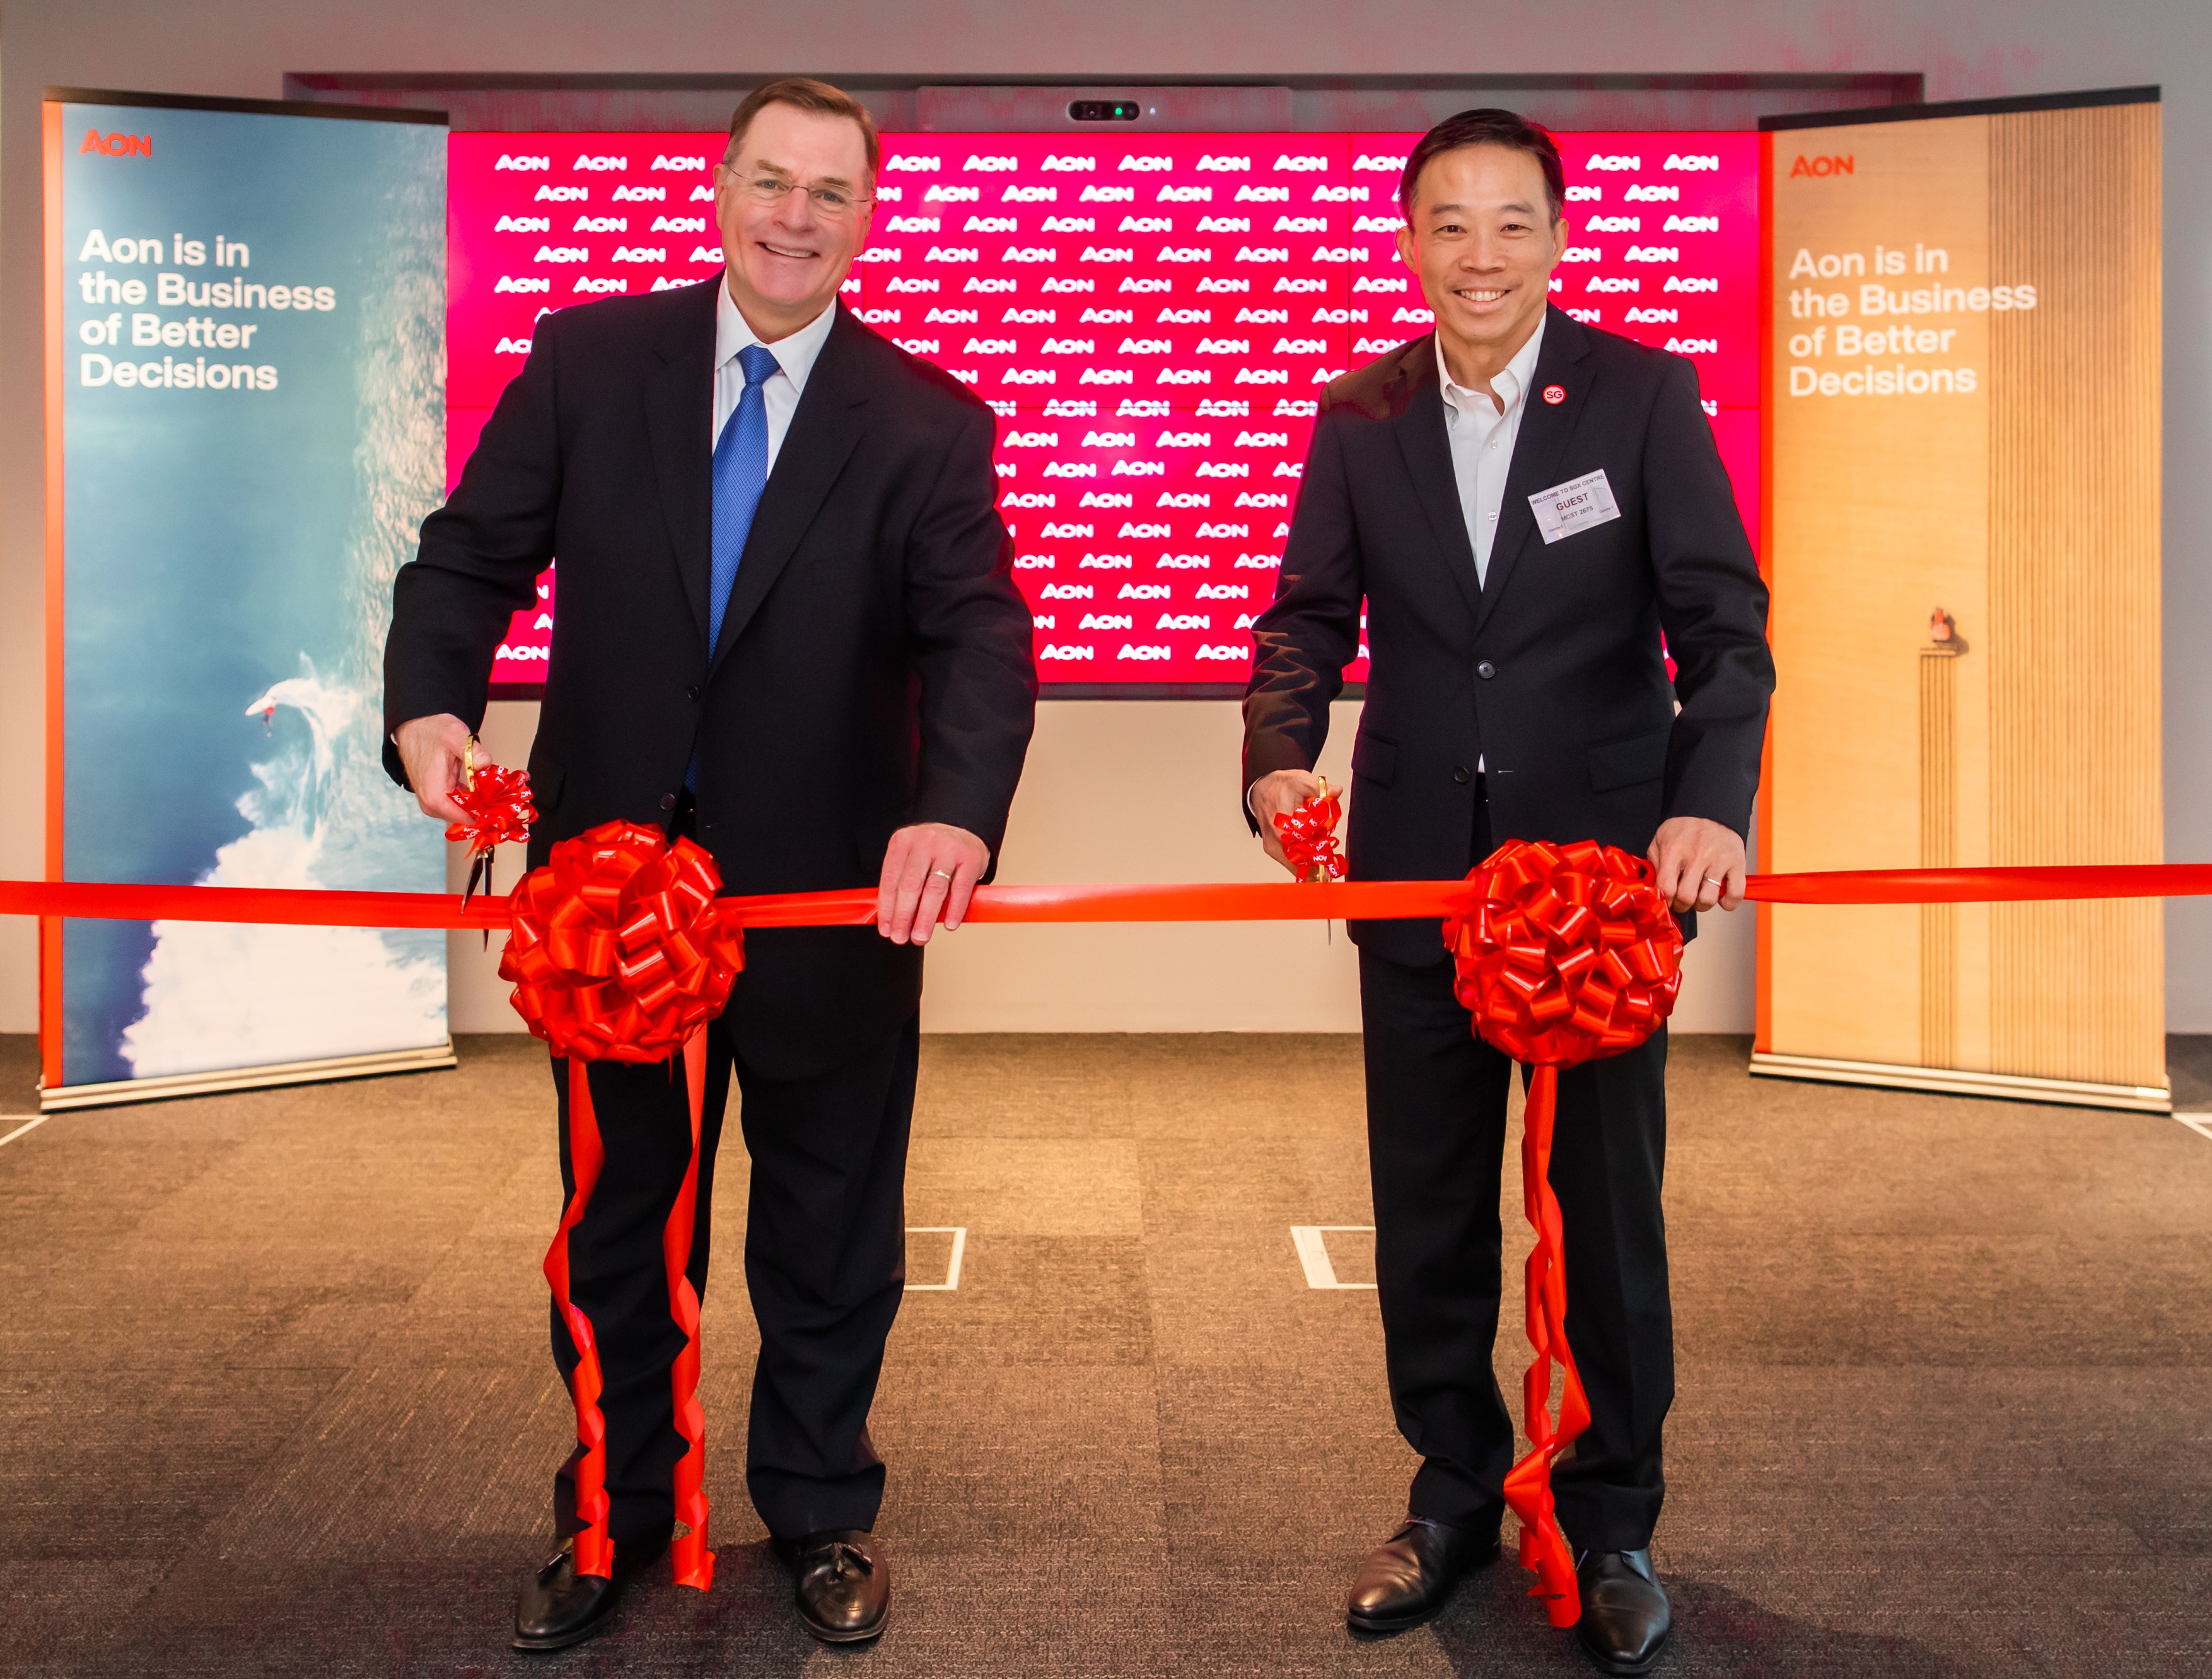 Greg Case, CEO of Aon and Png Cheong Boon, Chairman, Singapore Economic Development Board at the launch of Aon